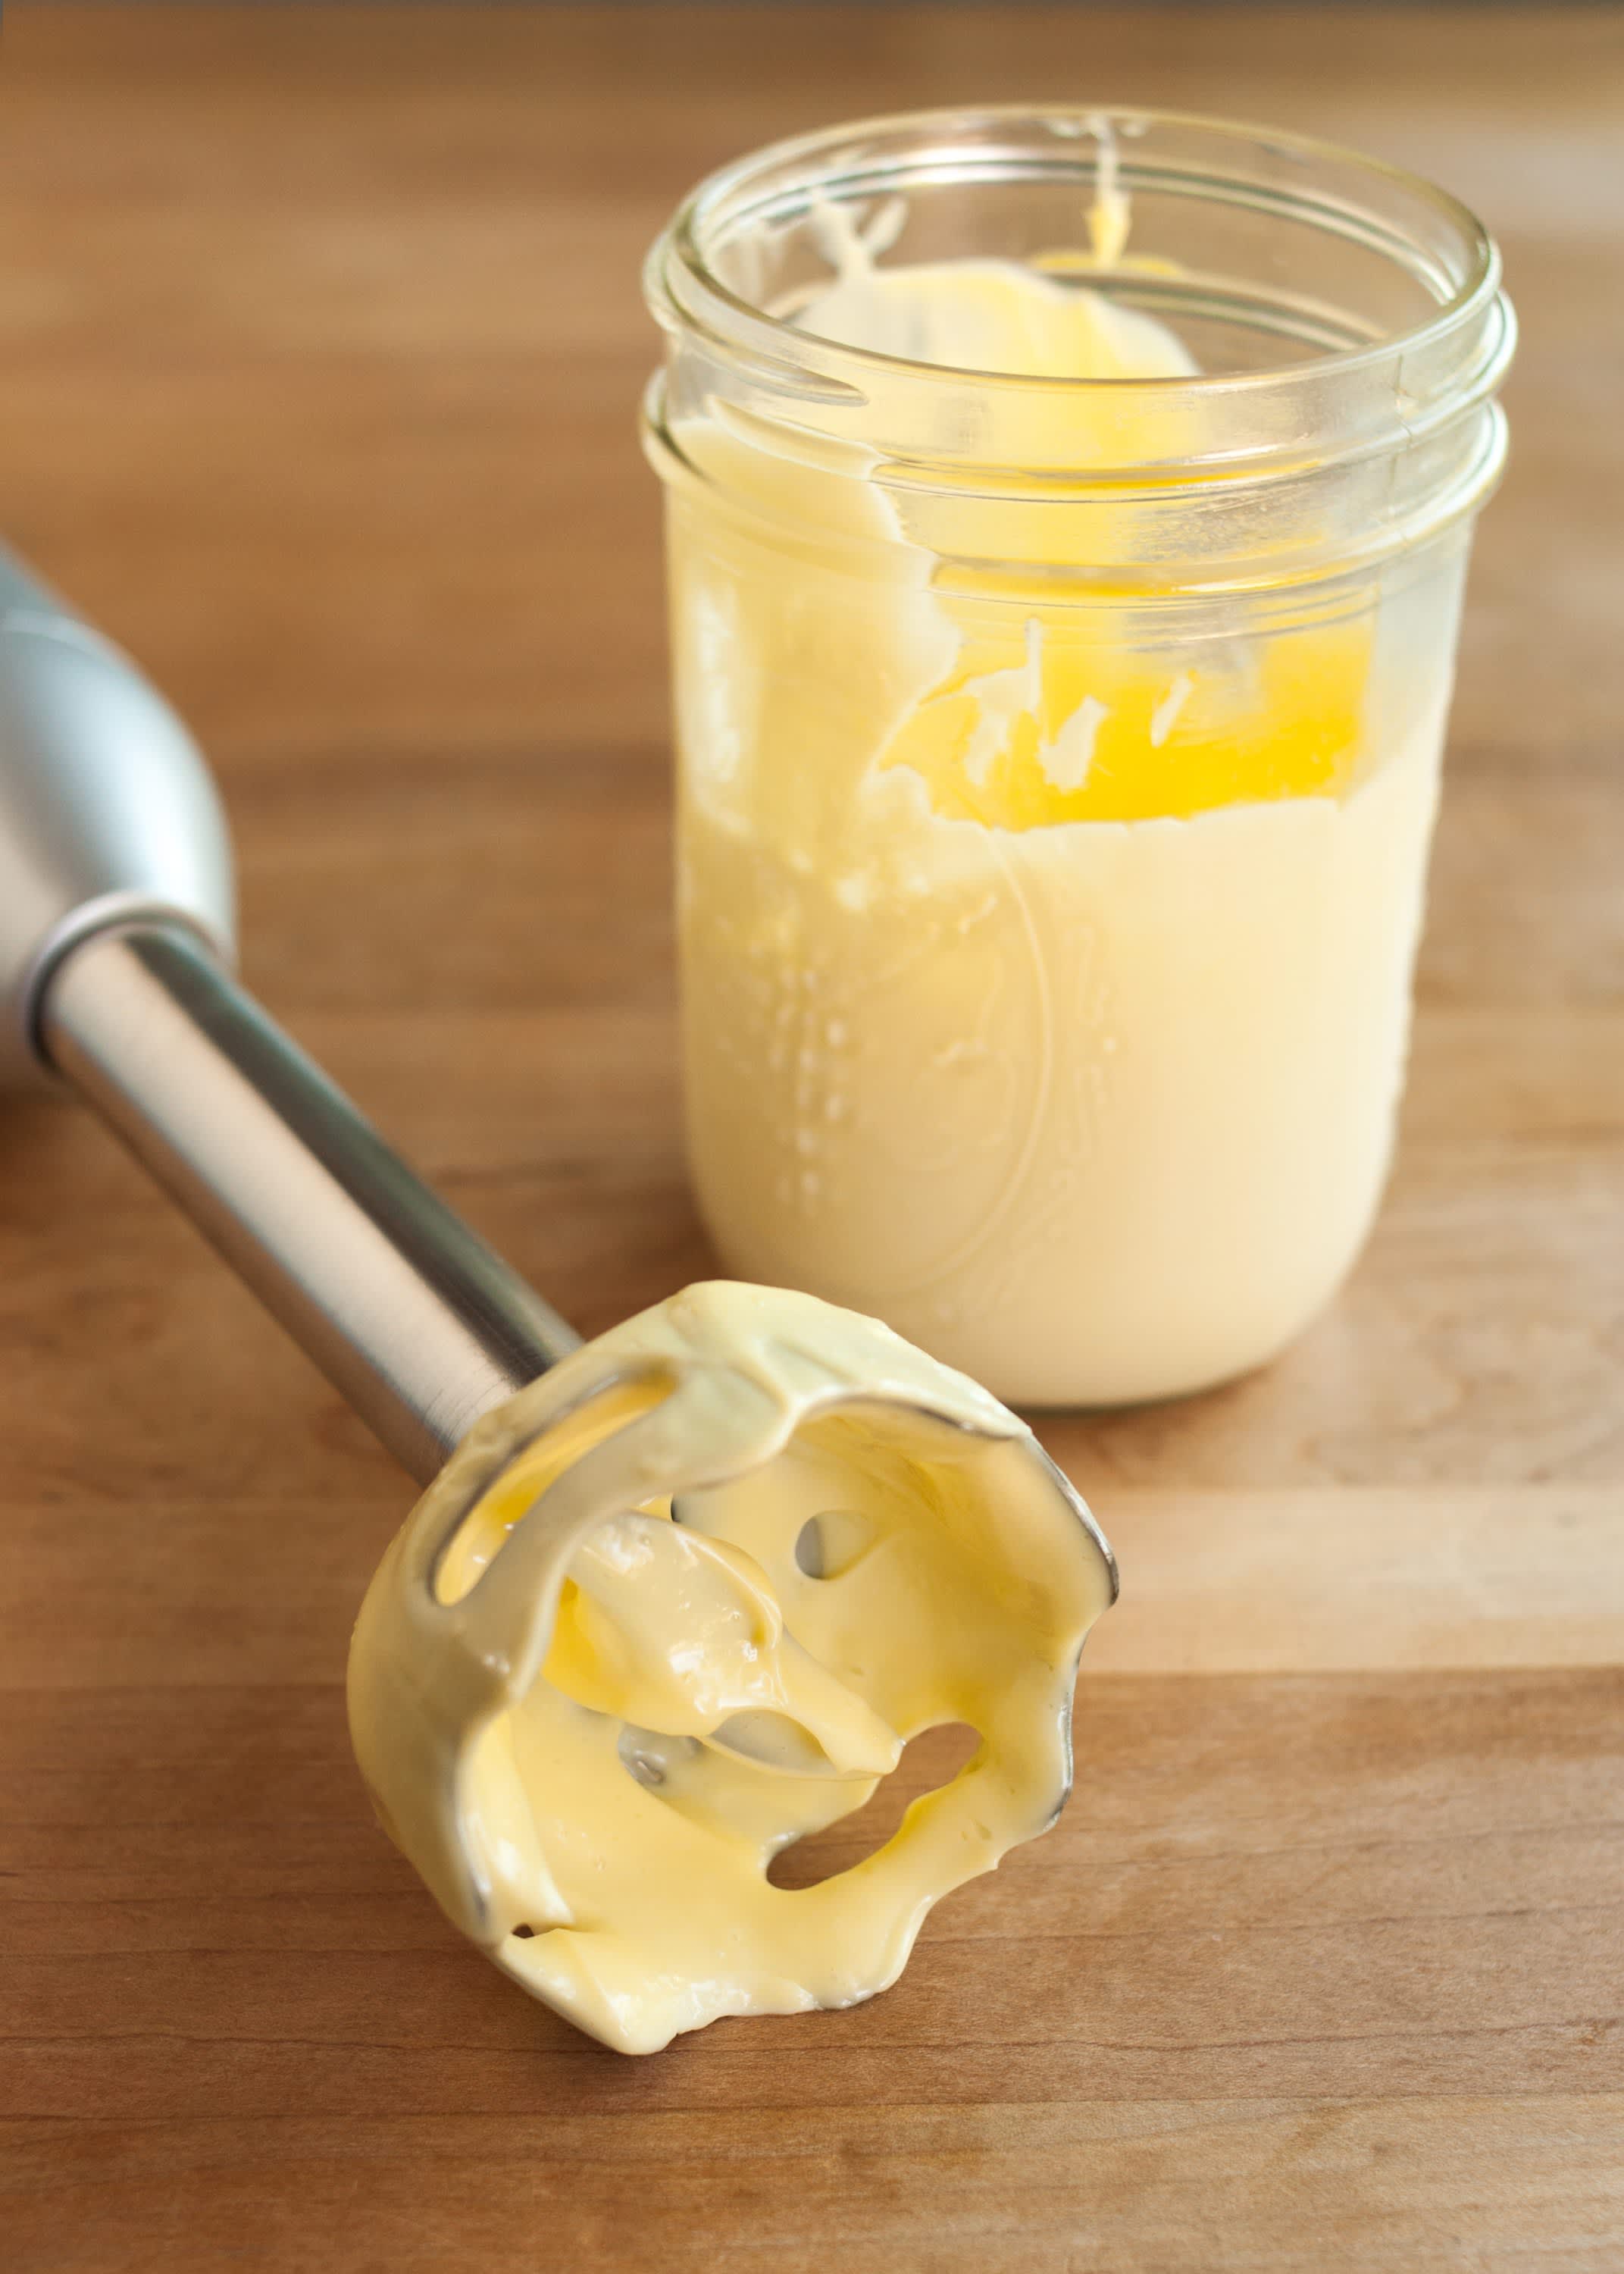 How To Make Mayonnaise with an Immersion Blender | Kitchn